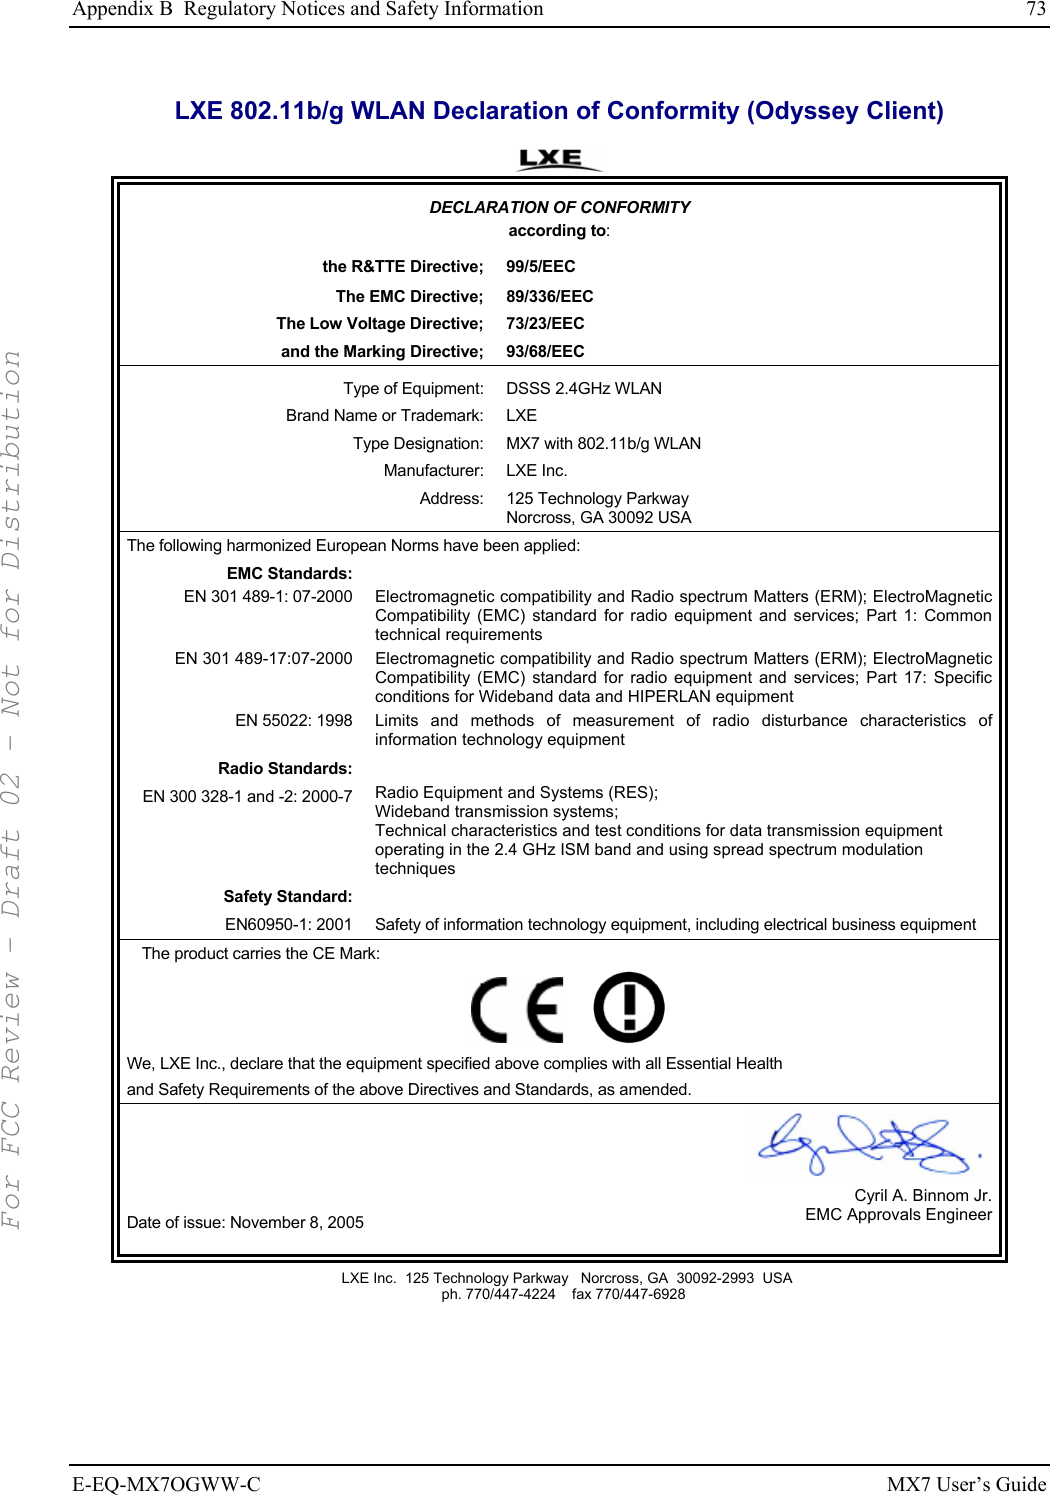 Appendix B  Regulatory Notices and Safety Information  73 E-EQ-MX7OGWW-C MX7 User’s Guide LXE 802.11b/g WLAN Declaration of Conformity (Odyssey Client)  DECLARATION OF CONFORMITY according to: the R&amp;TTE Directive;  99/5/EEC The EMC Directive;  89/336/EEC The Low Voltage Directive;  73/23/EEC and the Marking Directive;  93/68/EEC Type of Equipment:  DSSS 2.4GHz WLAN Brand Name or Trademark:  LXE Type Designation:  MX7 with 802.11b/g WLAN  Manufacturer: LXE Inc. Address: 125 Technology Parkway Norcross, GA 30092 USA The following harmonized European Norms have been applied:   EMC Standards:  EN 301 489-1: 07-2000  Electromagnetic compatibility and Radio spectrum Matters (ERM); ElectroMagnetic Compatibility (EMC) standard for radio equipment and services; Part 1: Common technical requirements EN 301 489-17:07-2000  Electromagnetic compatibility and Radio spectrum Matters (ERM); ElectroMagnetic Compatibility (EMC) standard for radio equipment and services; Part 17: Specific conditions for Wideband data and HIPERLAN equipment EN 55022: 1998 Limits and methods of measurement of radio disturbance characteristics of information technology equipment Radio Standards:  EN 300 328-1 and -2: 2000-7 Radio Equipment and Systems (RES); Wideband transmission systems; Technical characteristics and test conditions for data transmission equipment operating in the 2.4 GHz ISM band and using spread spectrum modulation techniques Safety Standard:  EN60950-1: 2001 Safety of information technology equipment, including electrical business equipment The product carries the CE Mark:         We, LXE Inc., declare that the equipment specified above complies with all Essential Health  and Safety Requirements of the above Directives and Standards, as amended. Date of issue: November 8, 2005 Cyril A. Binnom Jr.EMC Approvals Engineer  LXE Inc.  125 Technology Parkway   Norcross, GA  30092-2993  USA   ph. 770/447-4224    fax 770/447-6928  For FCC Review - Draft 02 - Not for Distribution